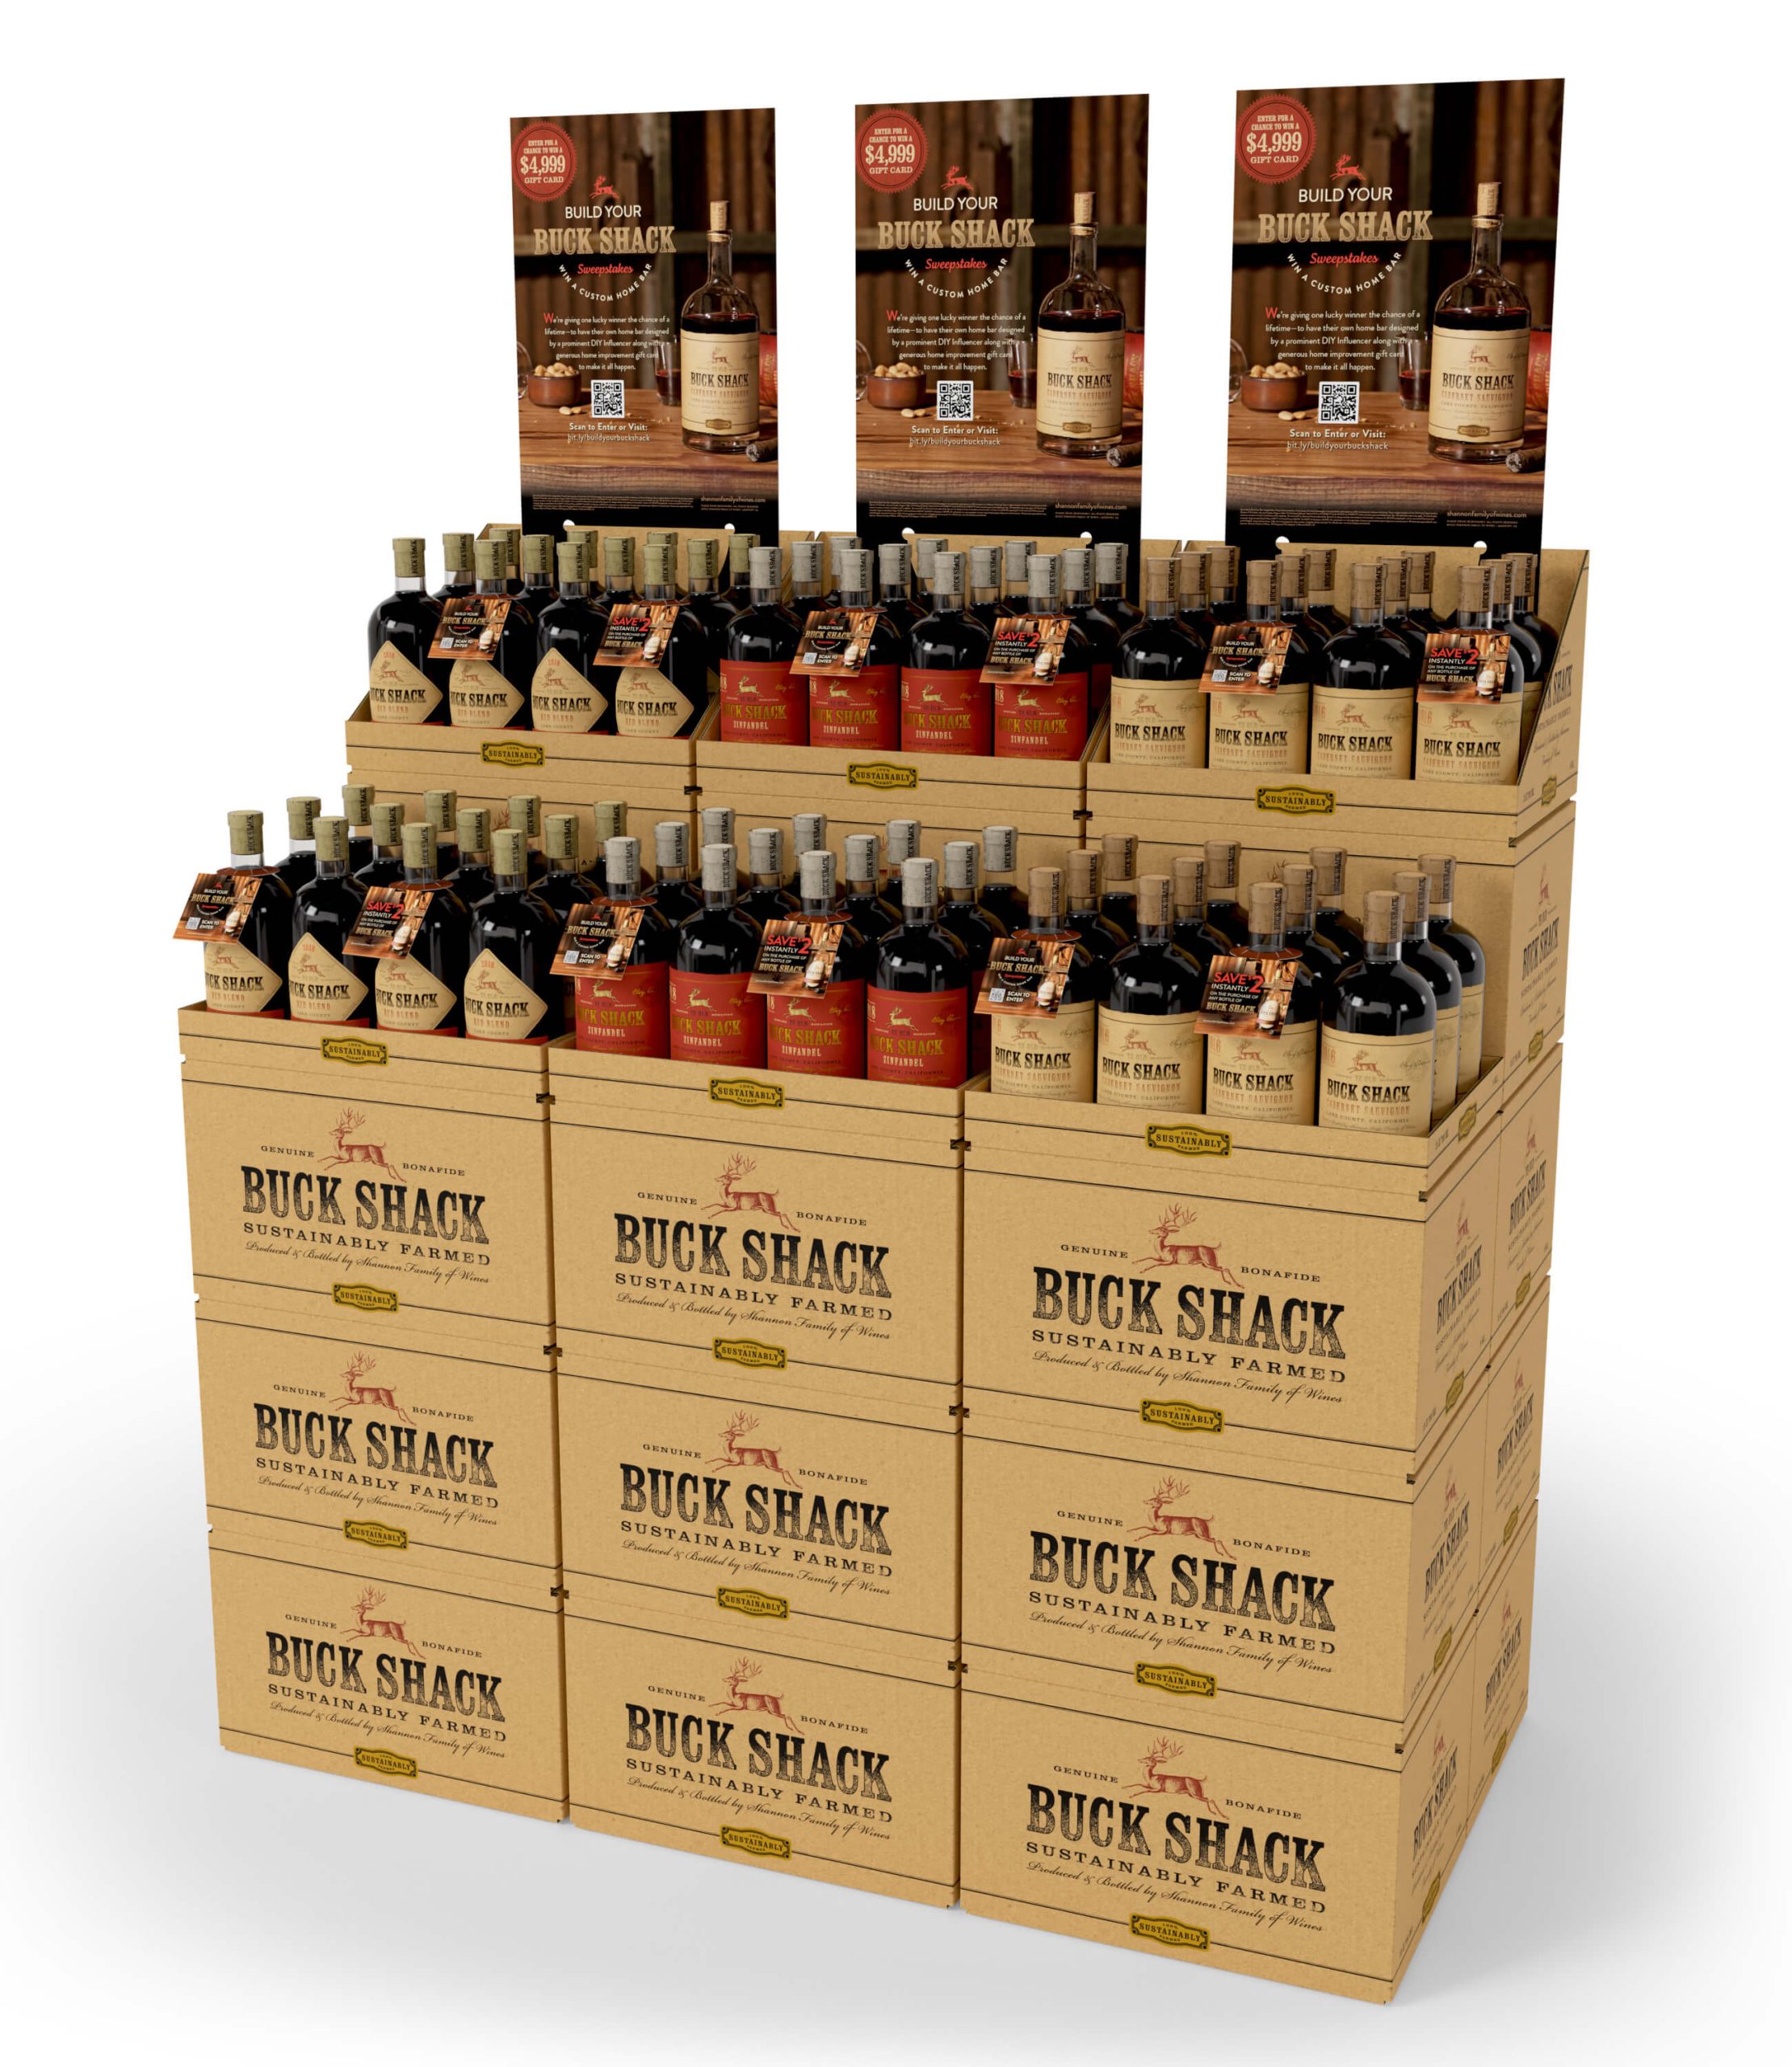 A display of several bottles of wine in cardboard boxes.